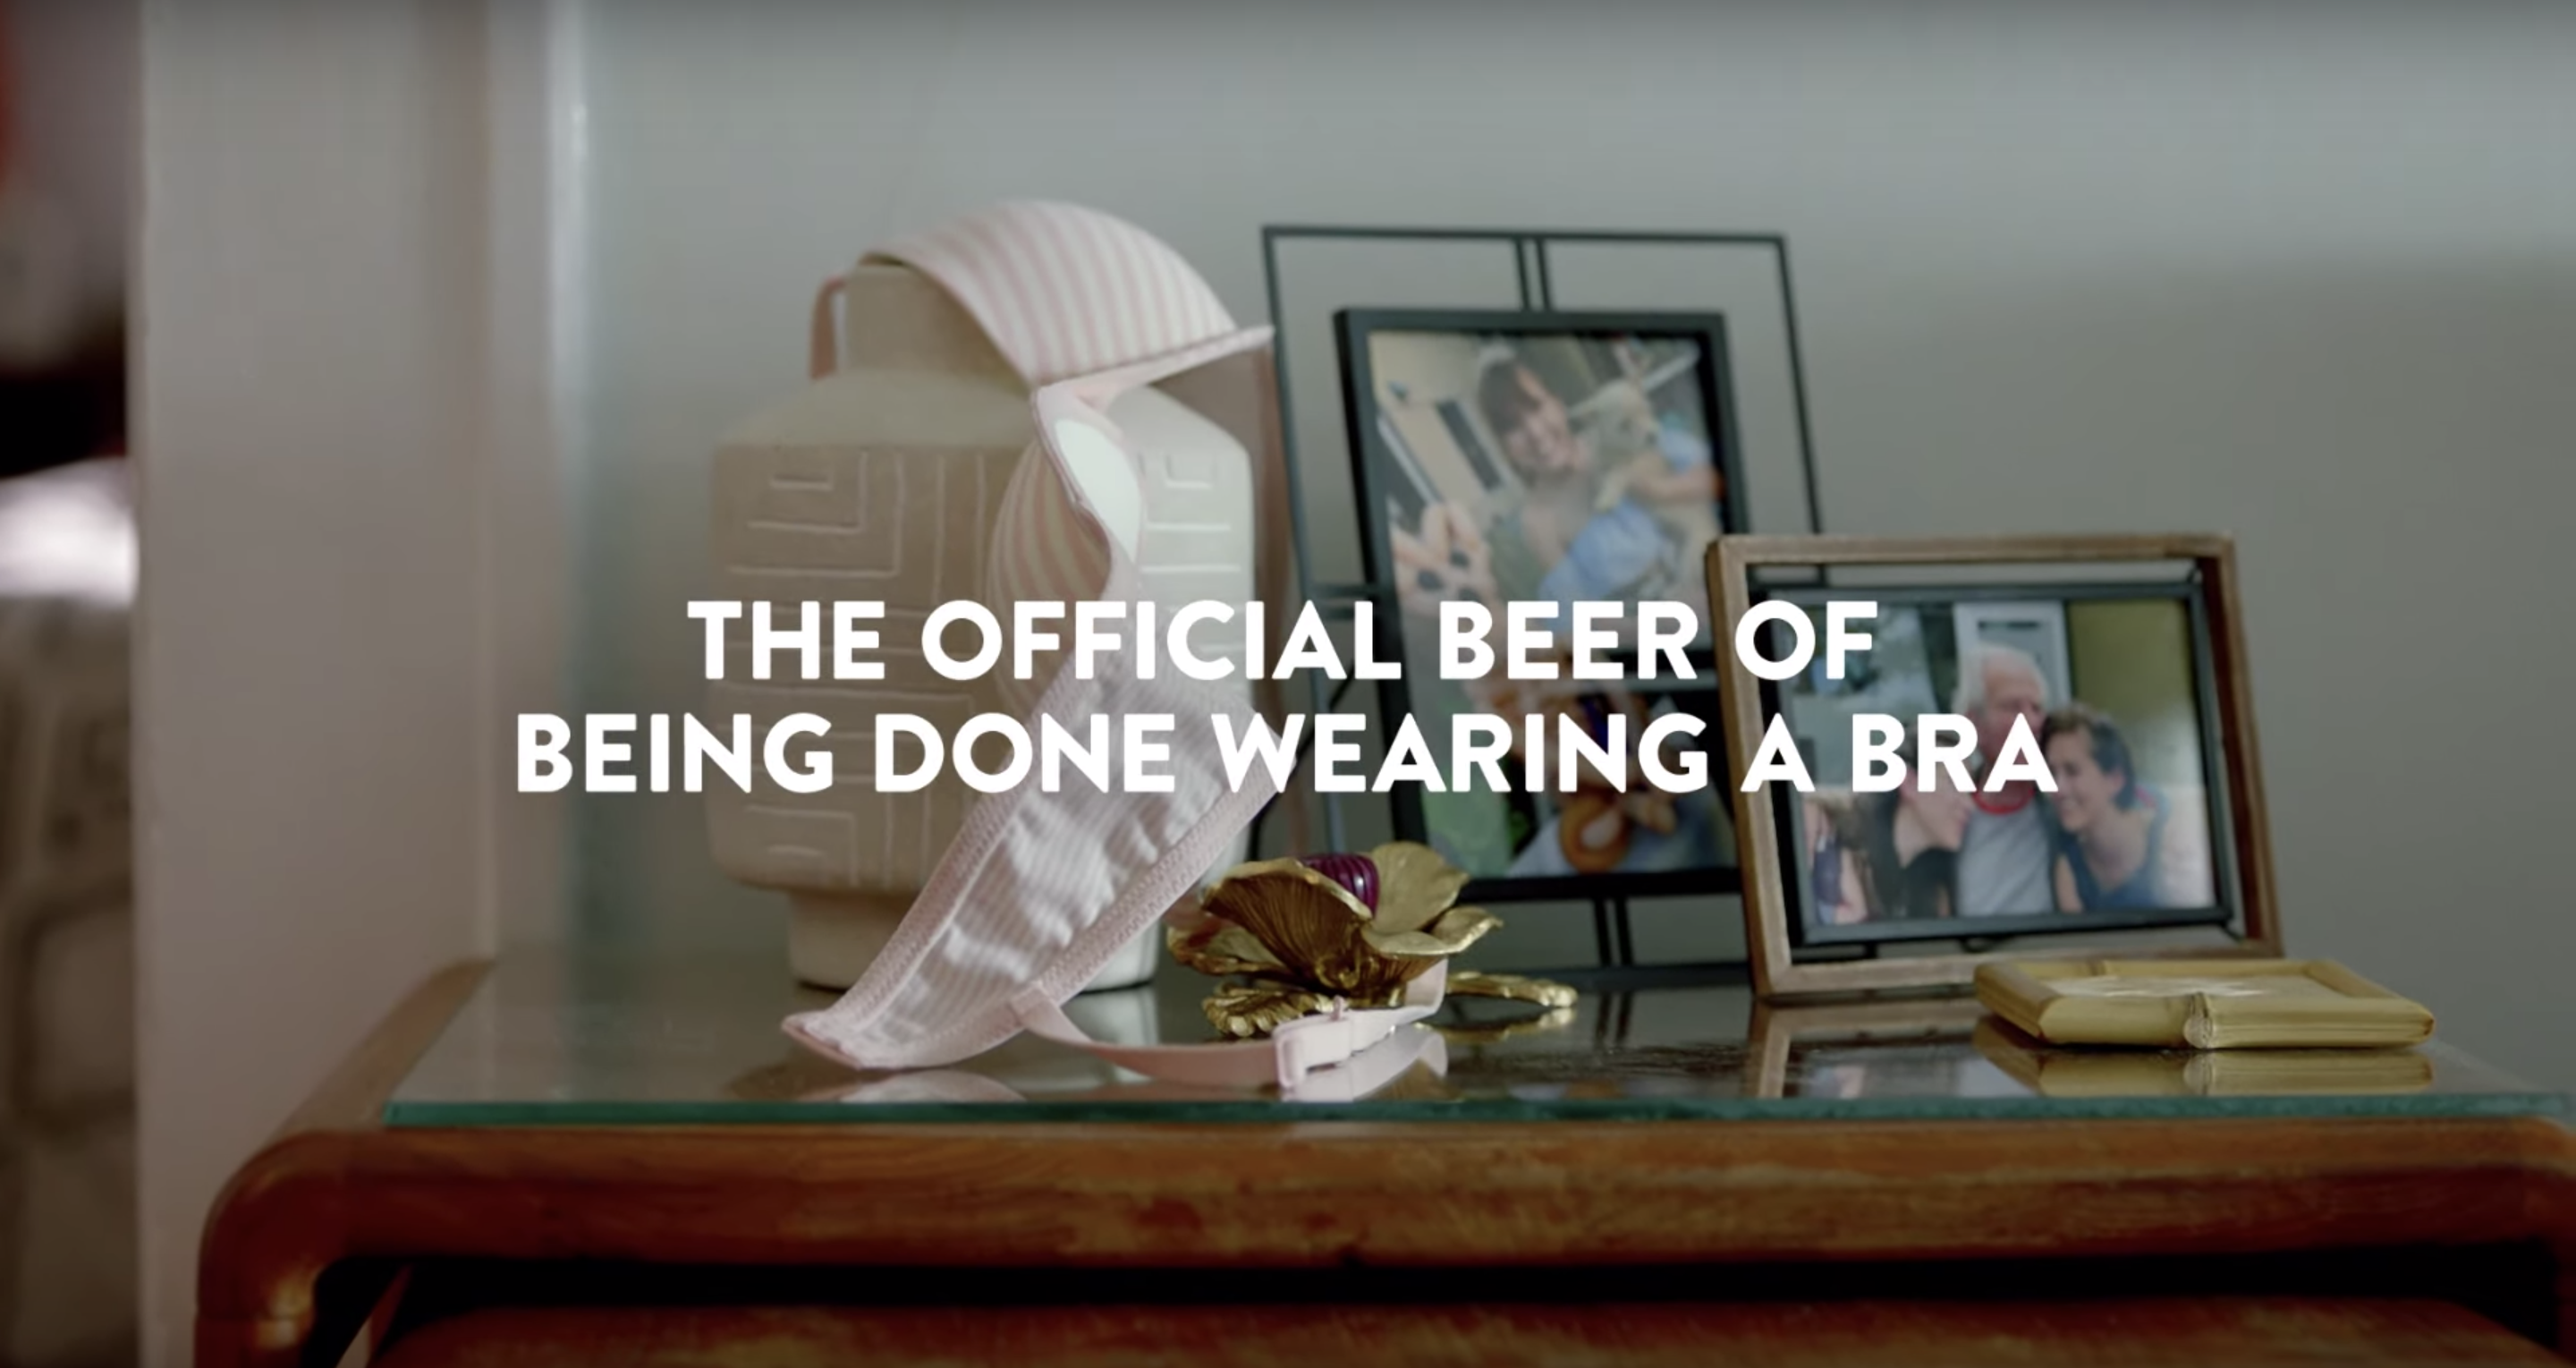 A woman’s discarded bra lays slung over framed photos on a glass side table with the words “The official beer of being done wearing a bra.”